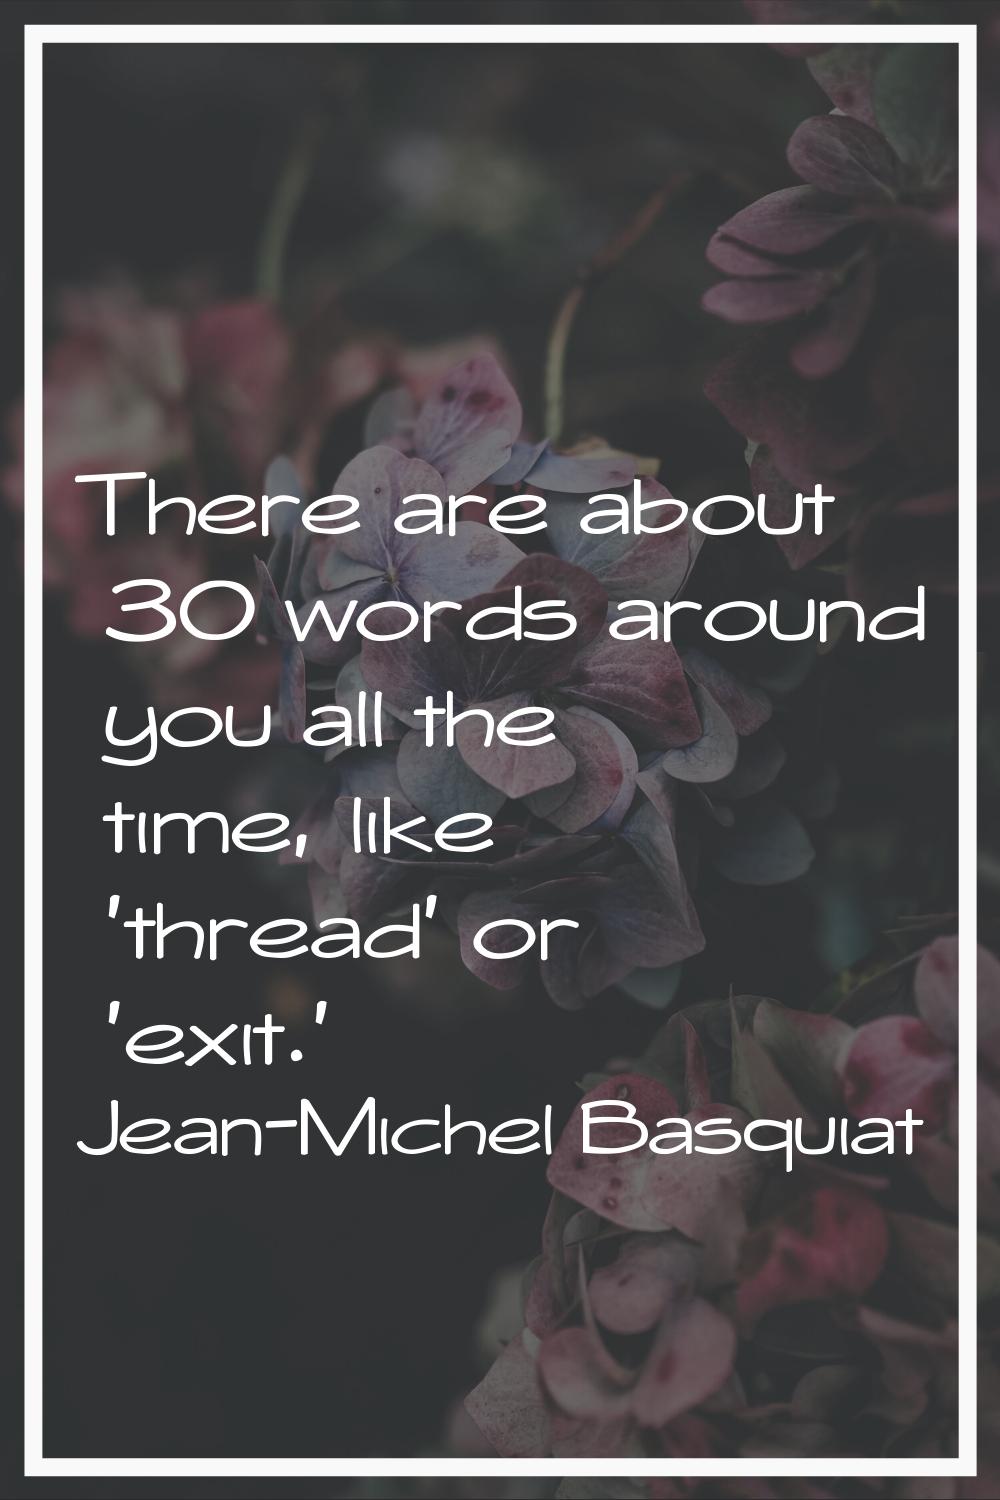 There are about 30 words around you all the time, like 'thread' or 'exit.'